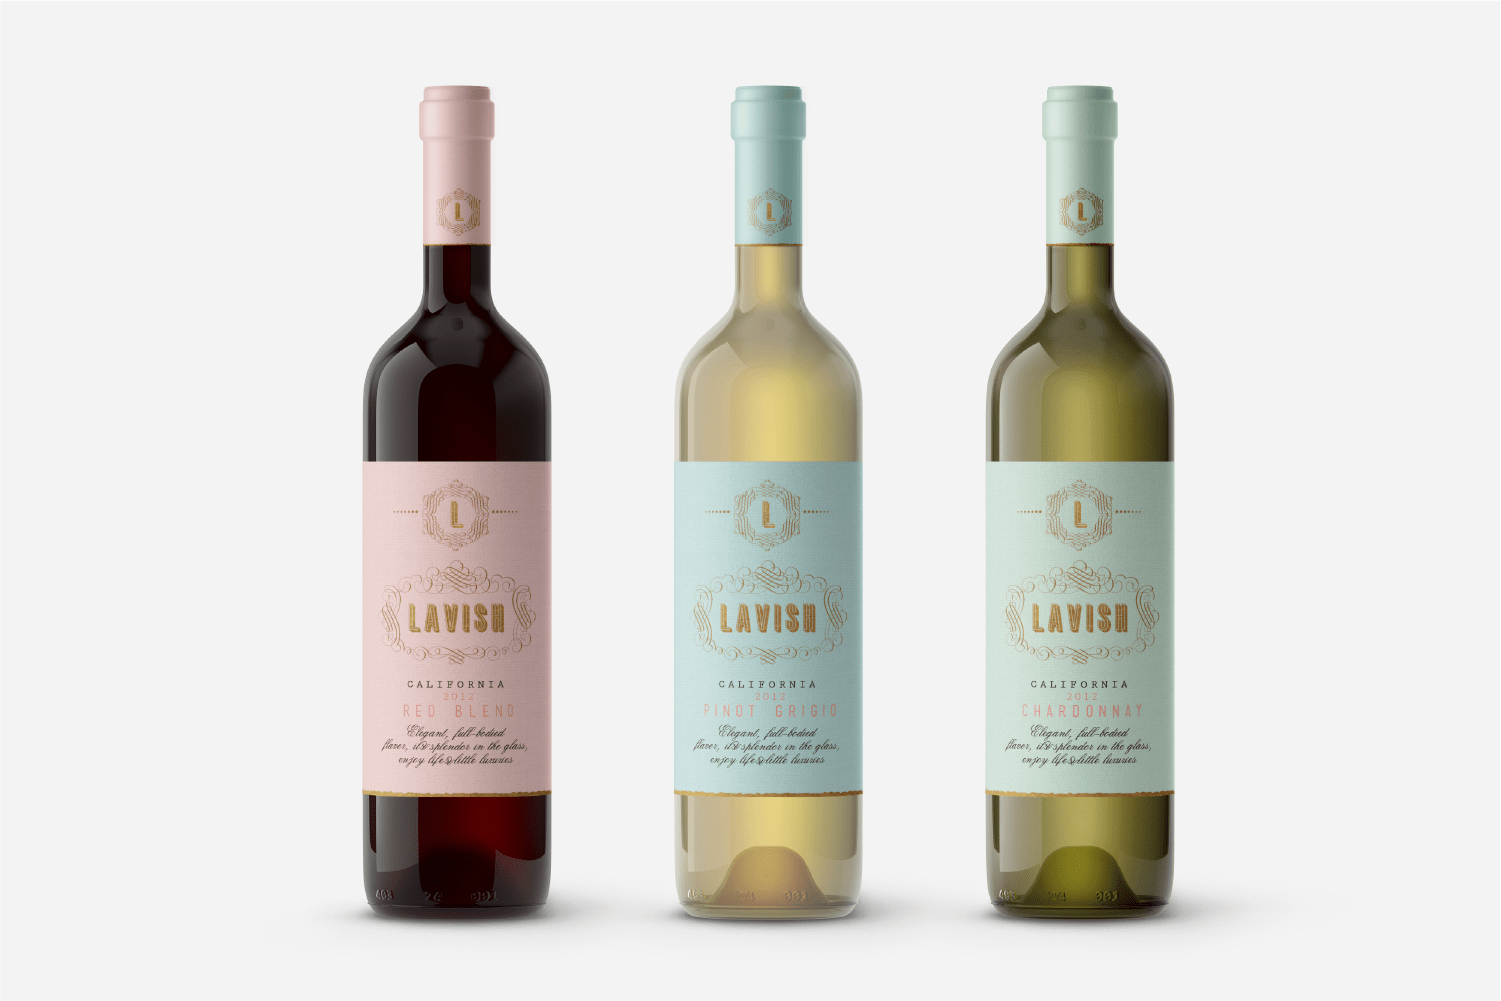 Lavish Brand packaging concepts from Juli Shore Design before name changed to Belle Ambiance.